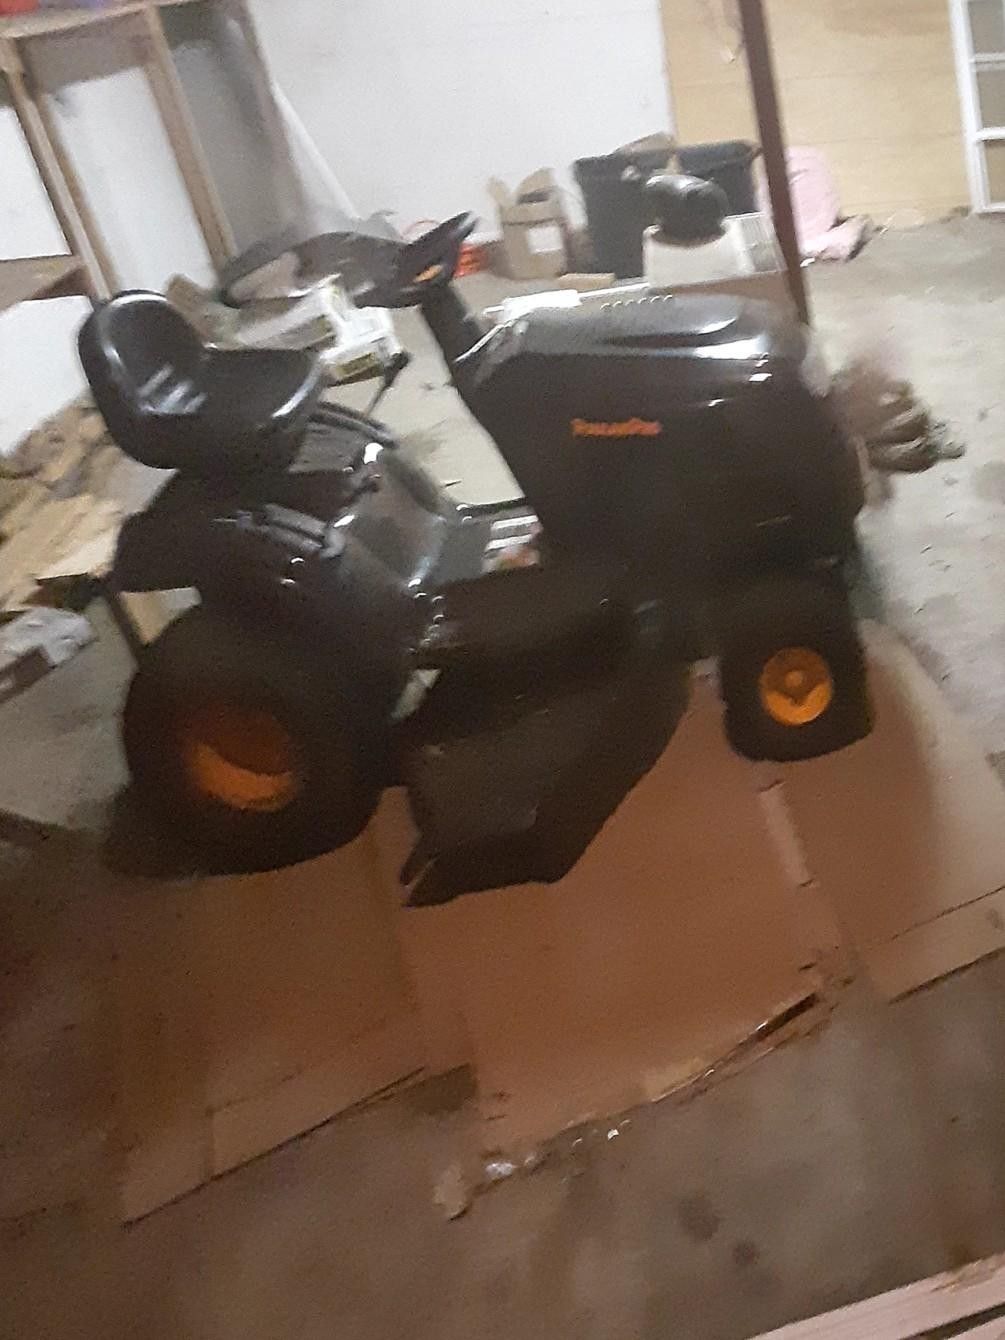 lawn mower 700 on eBay I want 450 for mines